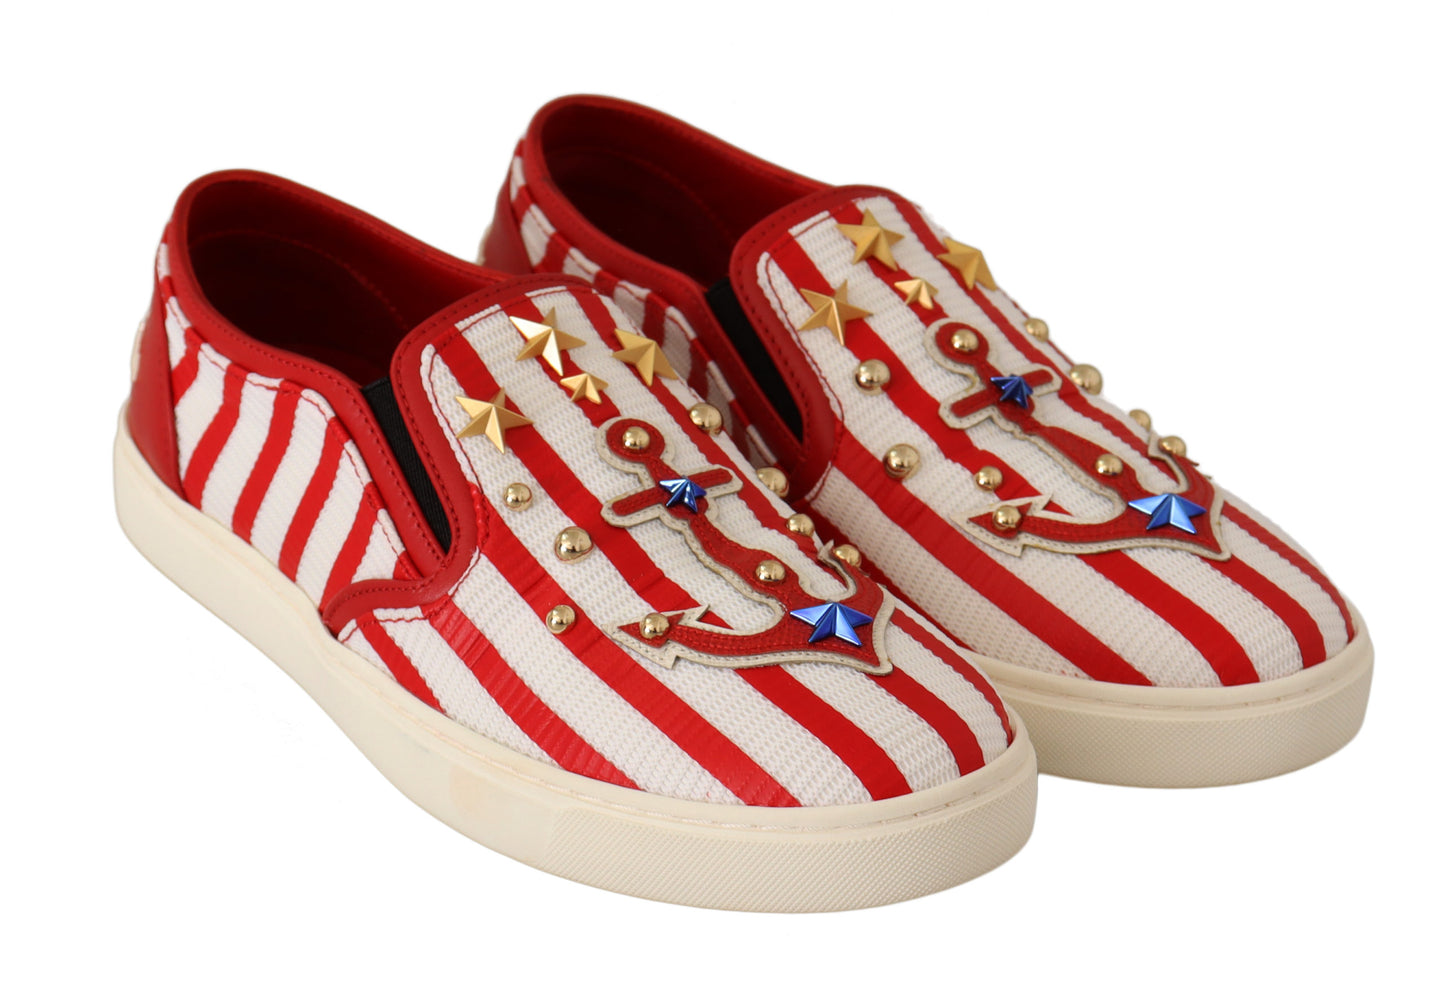 Dolce & Gabbana Red White Anchor Studded Loafers Shoes - DEA STILOSA MILANO